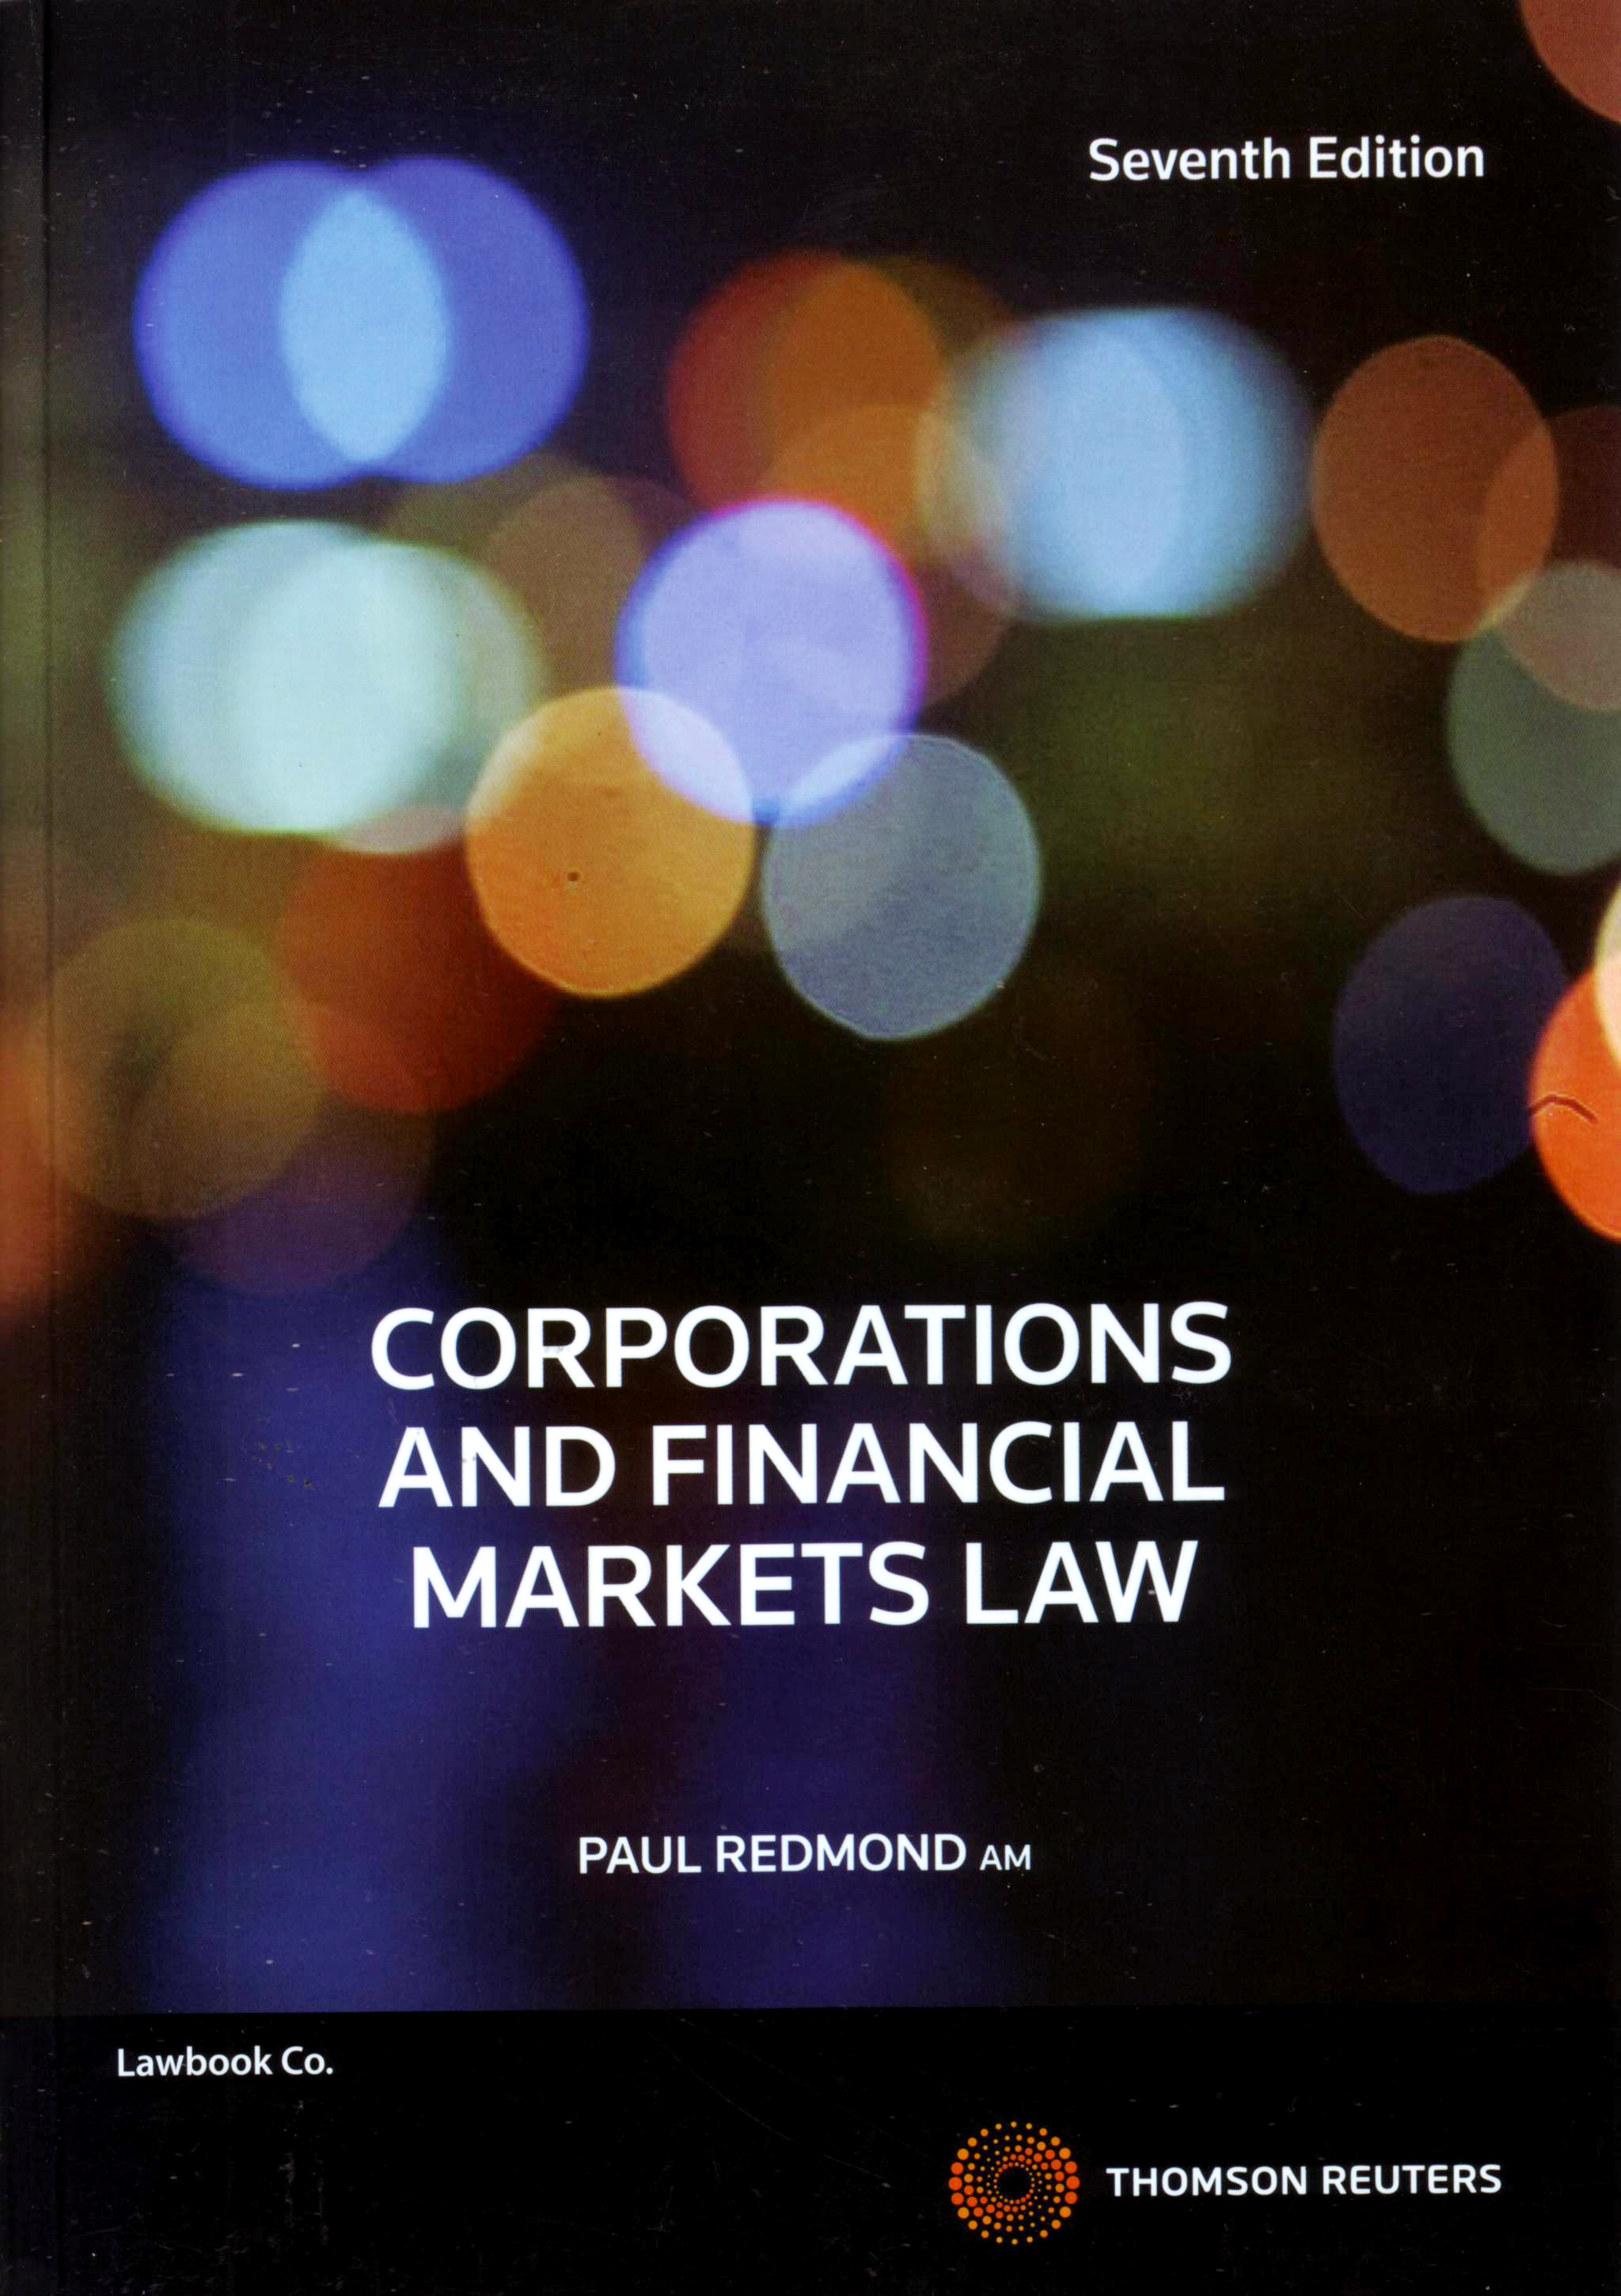 Corporations and Financial Markets Law e7